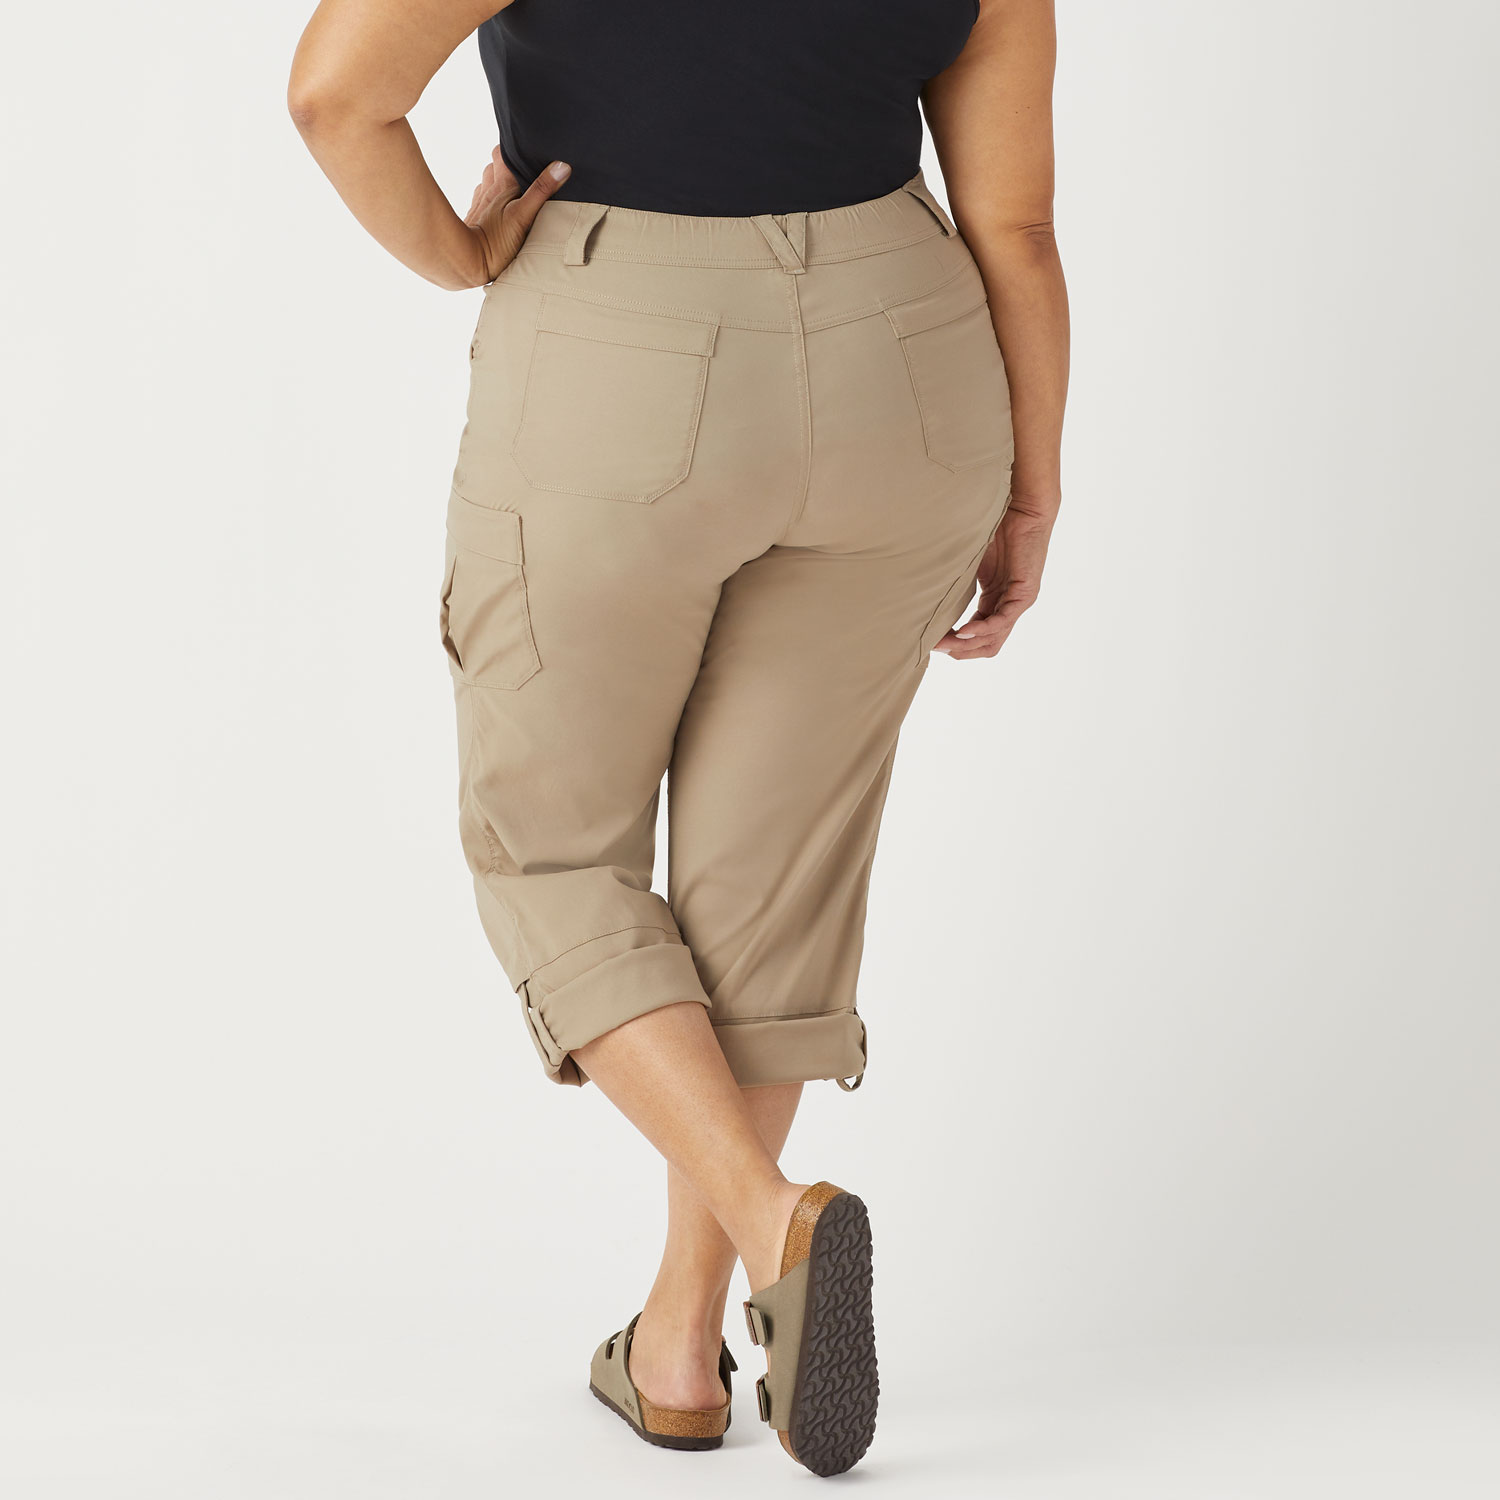 Women's Plus Dry on the Fly Improved Bootcut Pants